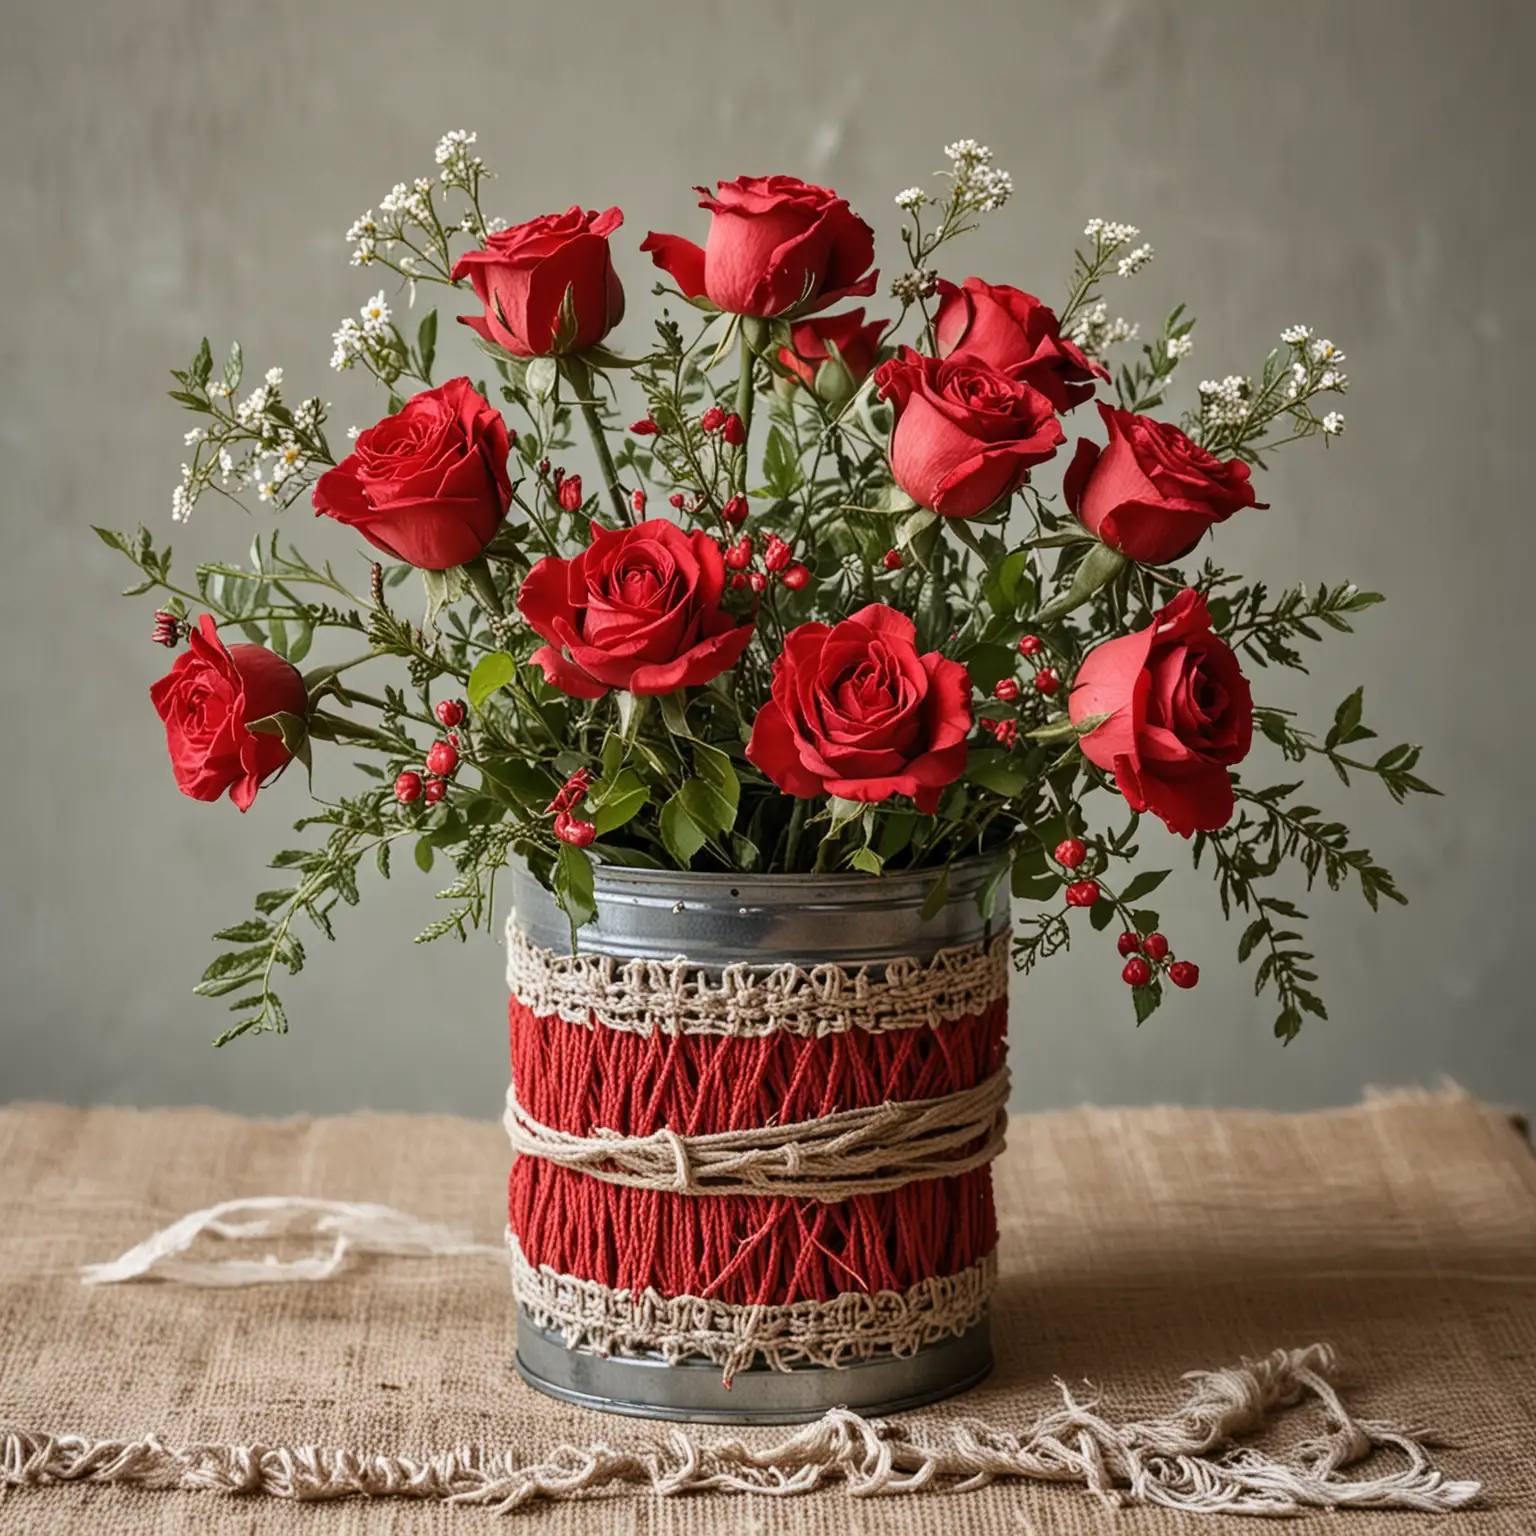 Boho-Red-Rose-Centerpiece-HandPainted-Tin-Can-Vase-with-Macrame-and-Wild-Flowers